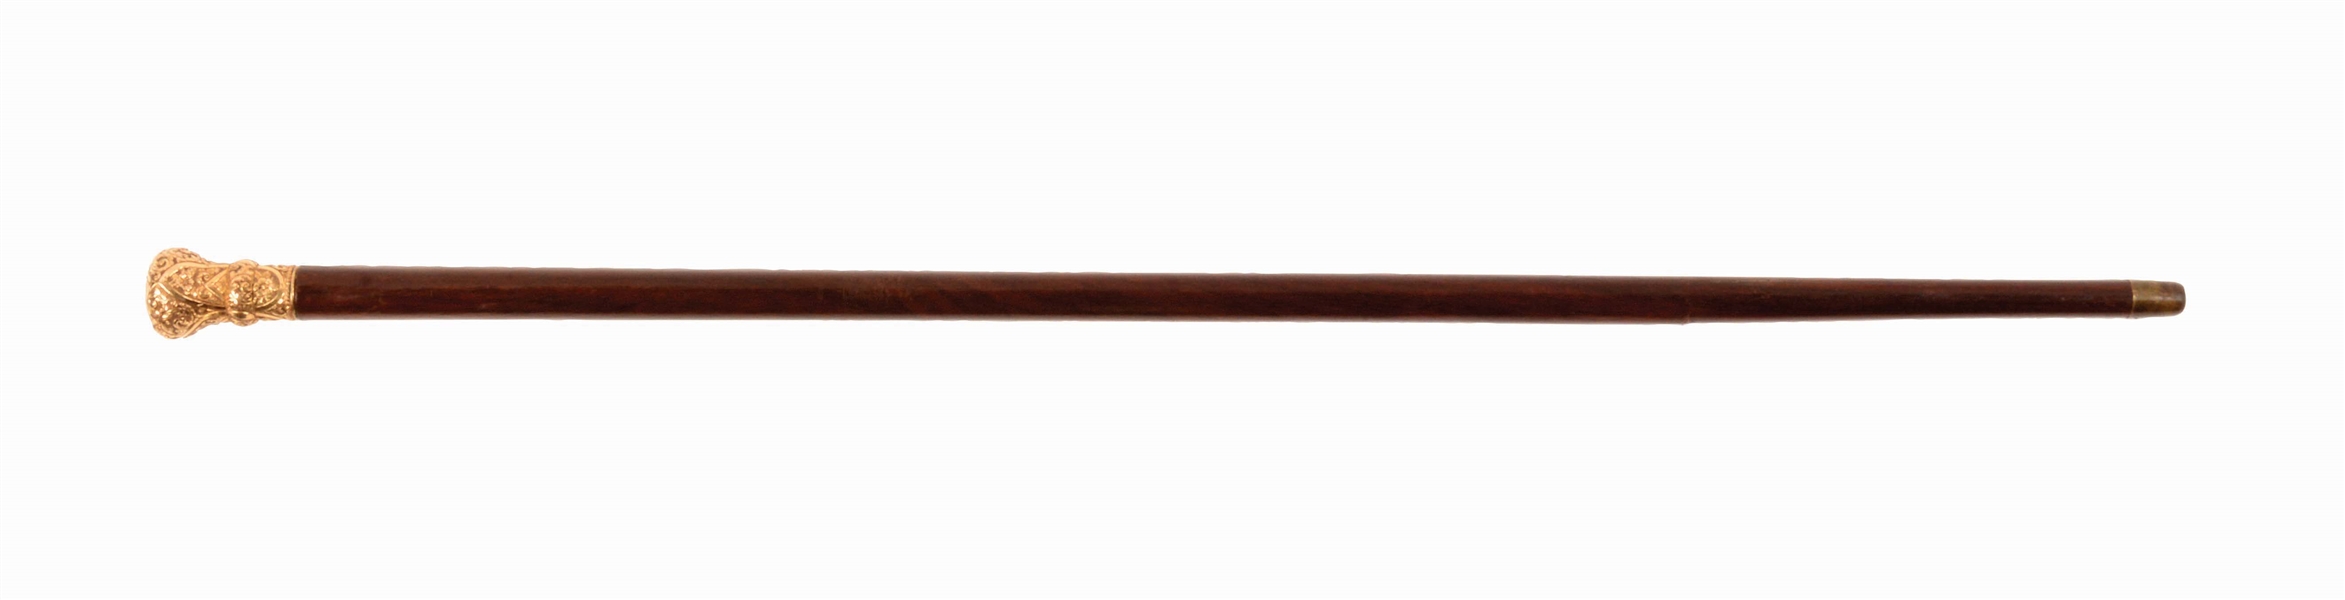 DOCTORS SURGICAL CANE WITH PRESENTATION HANDLE.